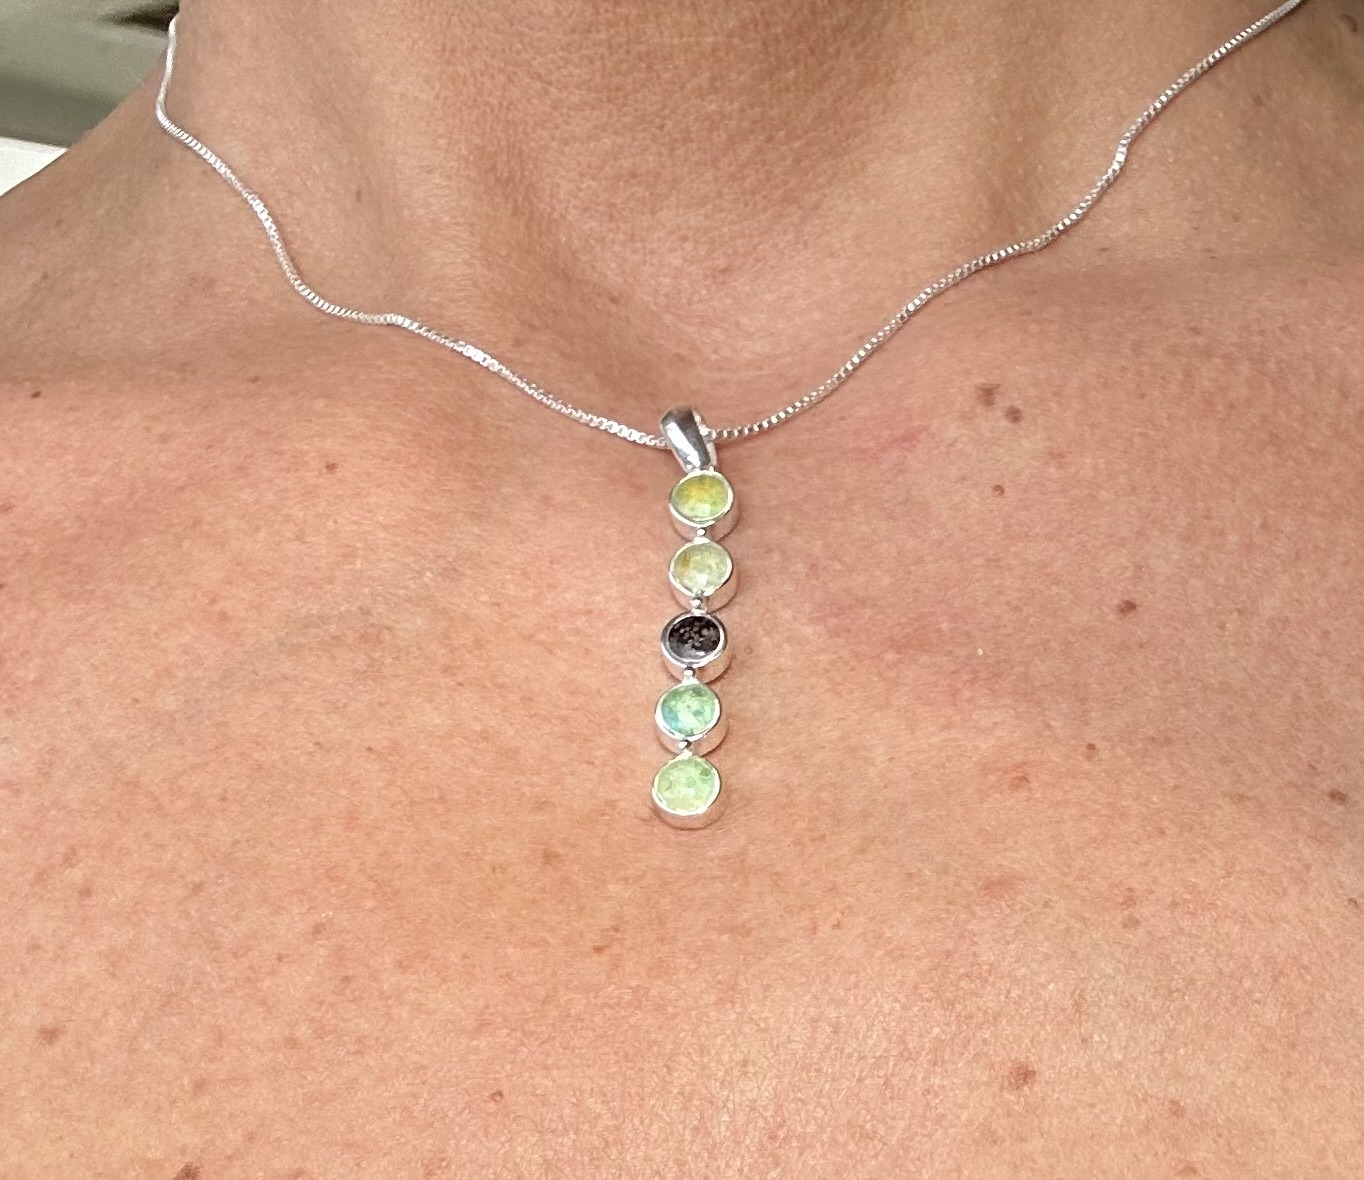 Close-up of Dune Jewelry's Endless Summer Vertical Bar Necklace with 5 sand, shell, and sea glass elements.